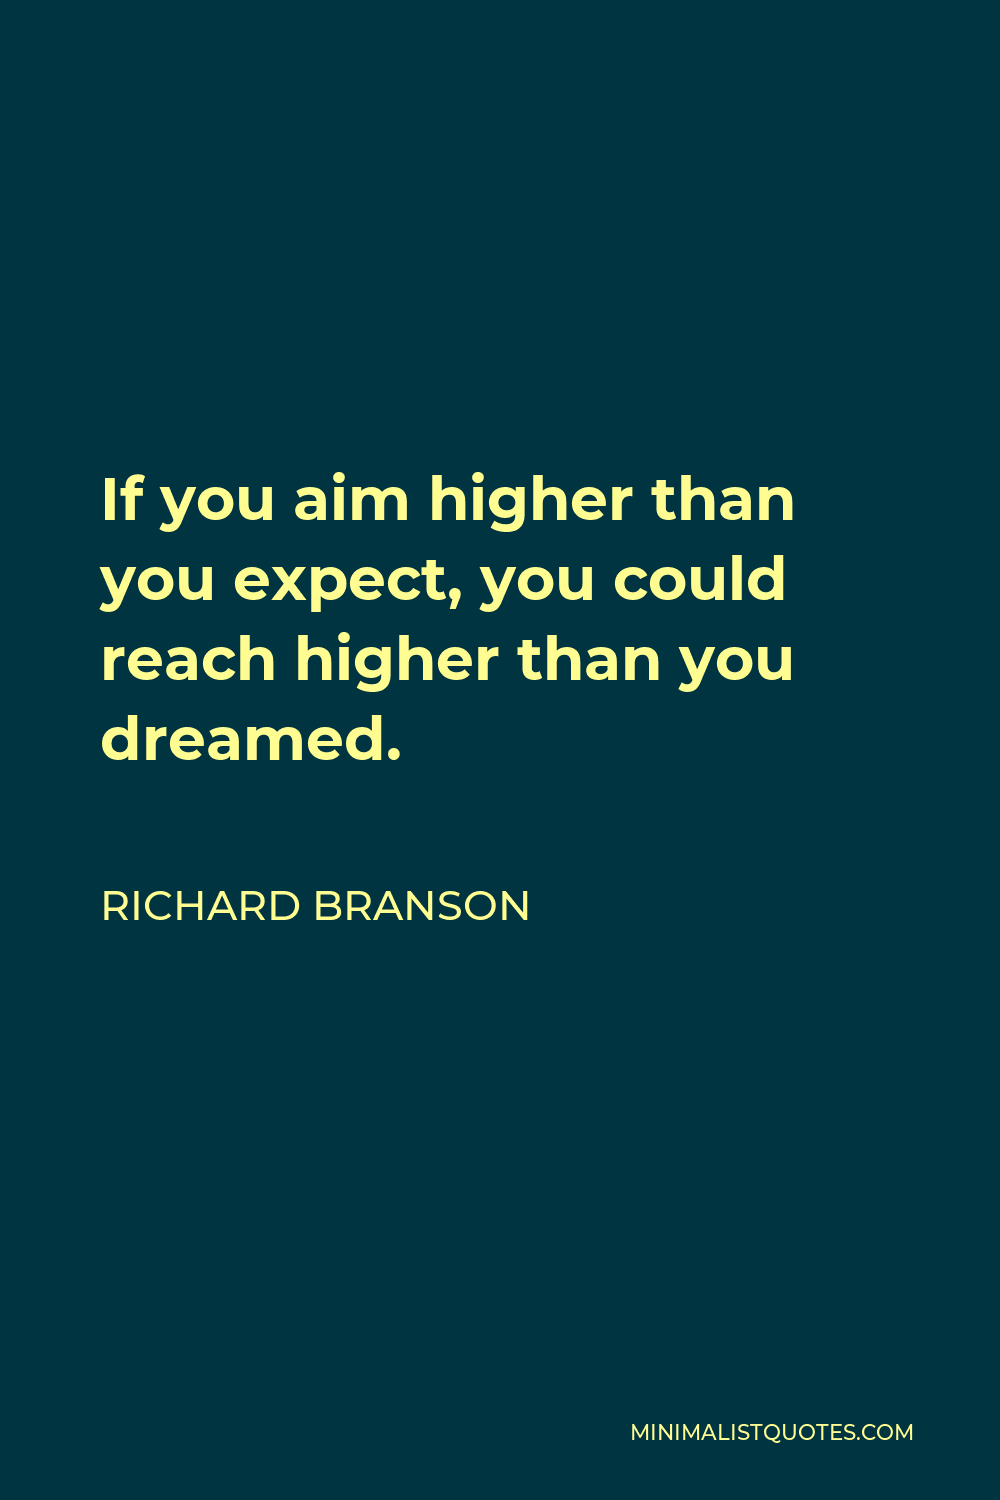 Richard Branson Quote - If you aim higher than you expect, you could reach higher than you dreamed.